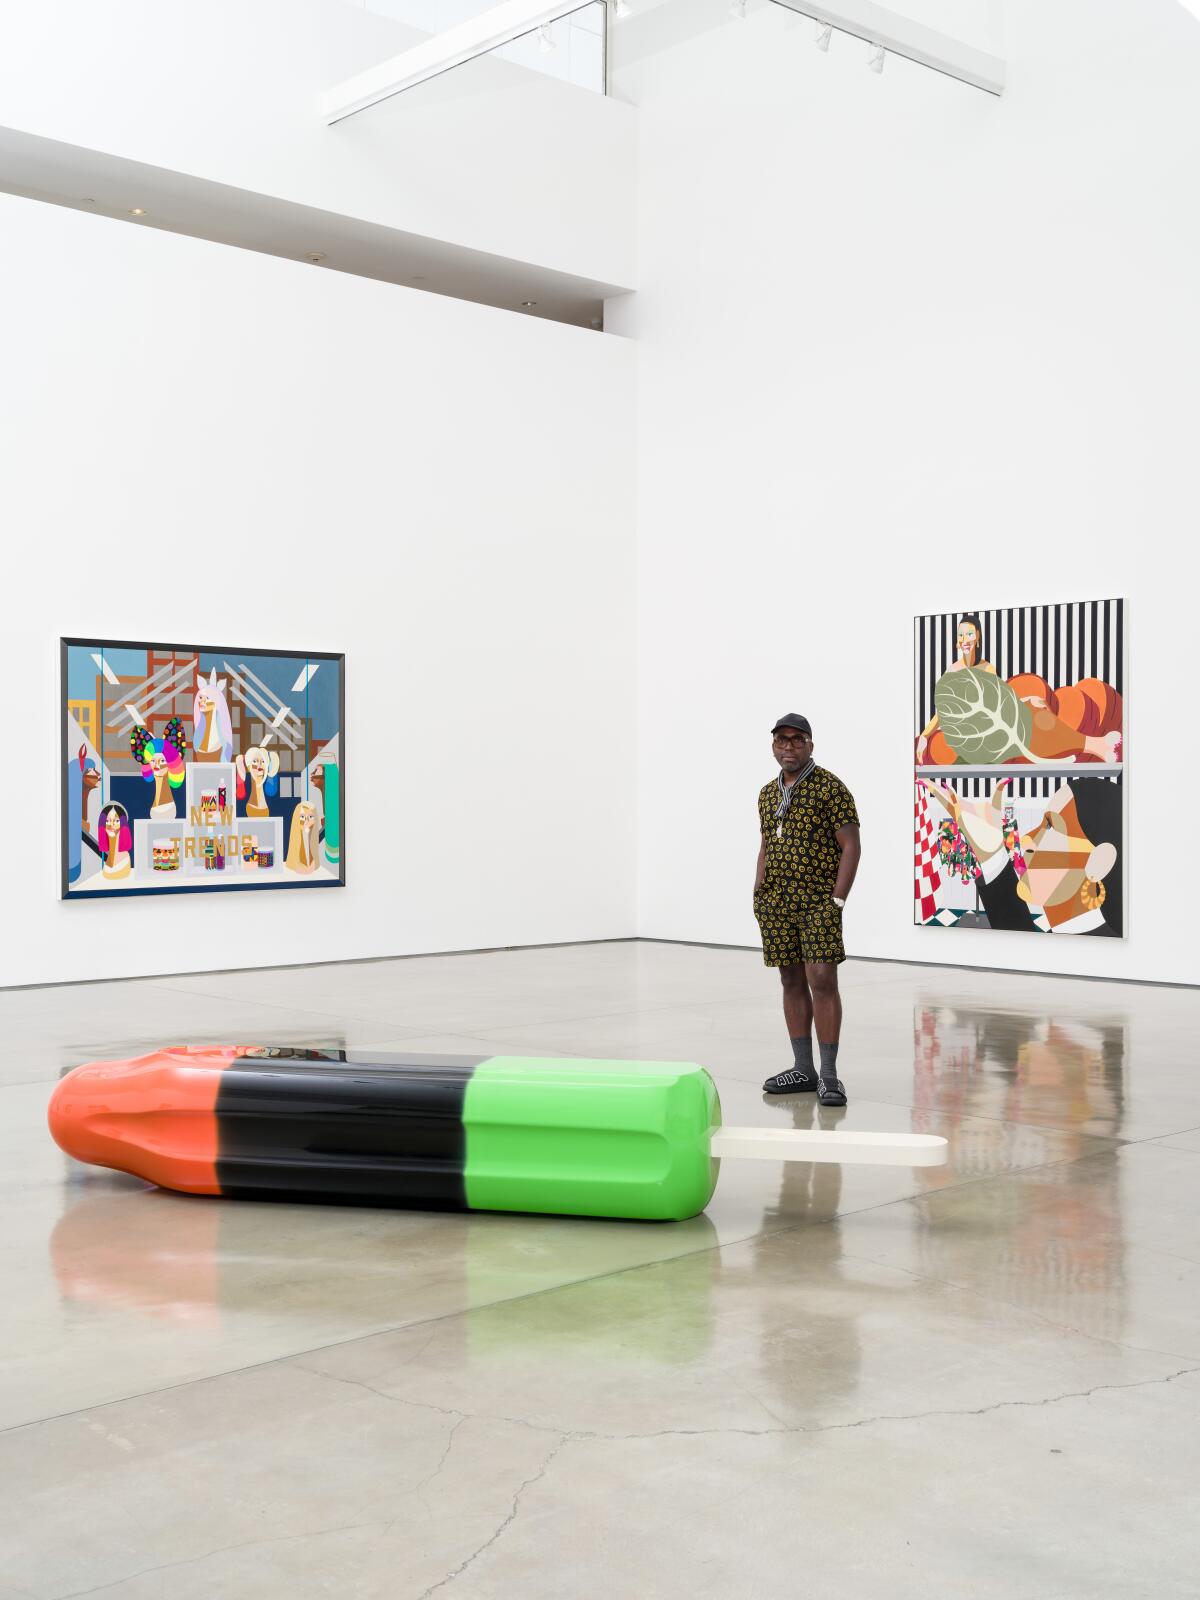 A man stands in an art gallery next to a giant popsicle sculpture on the floor